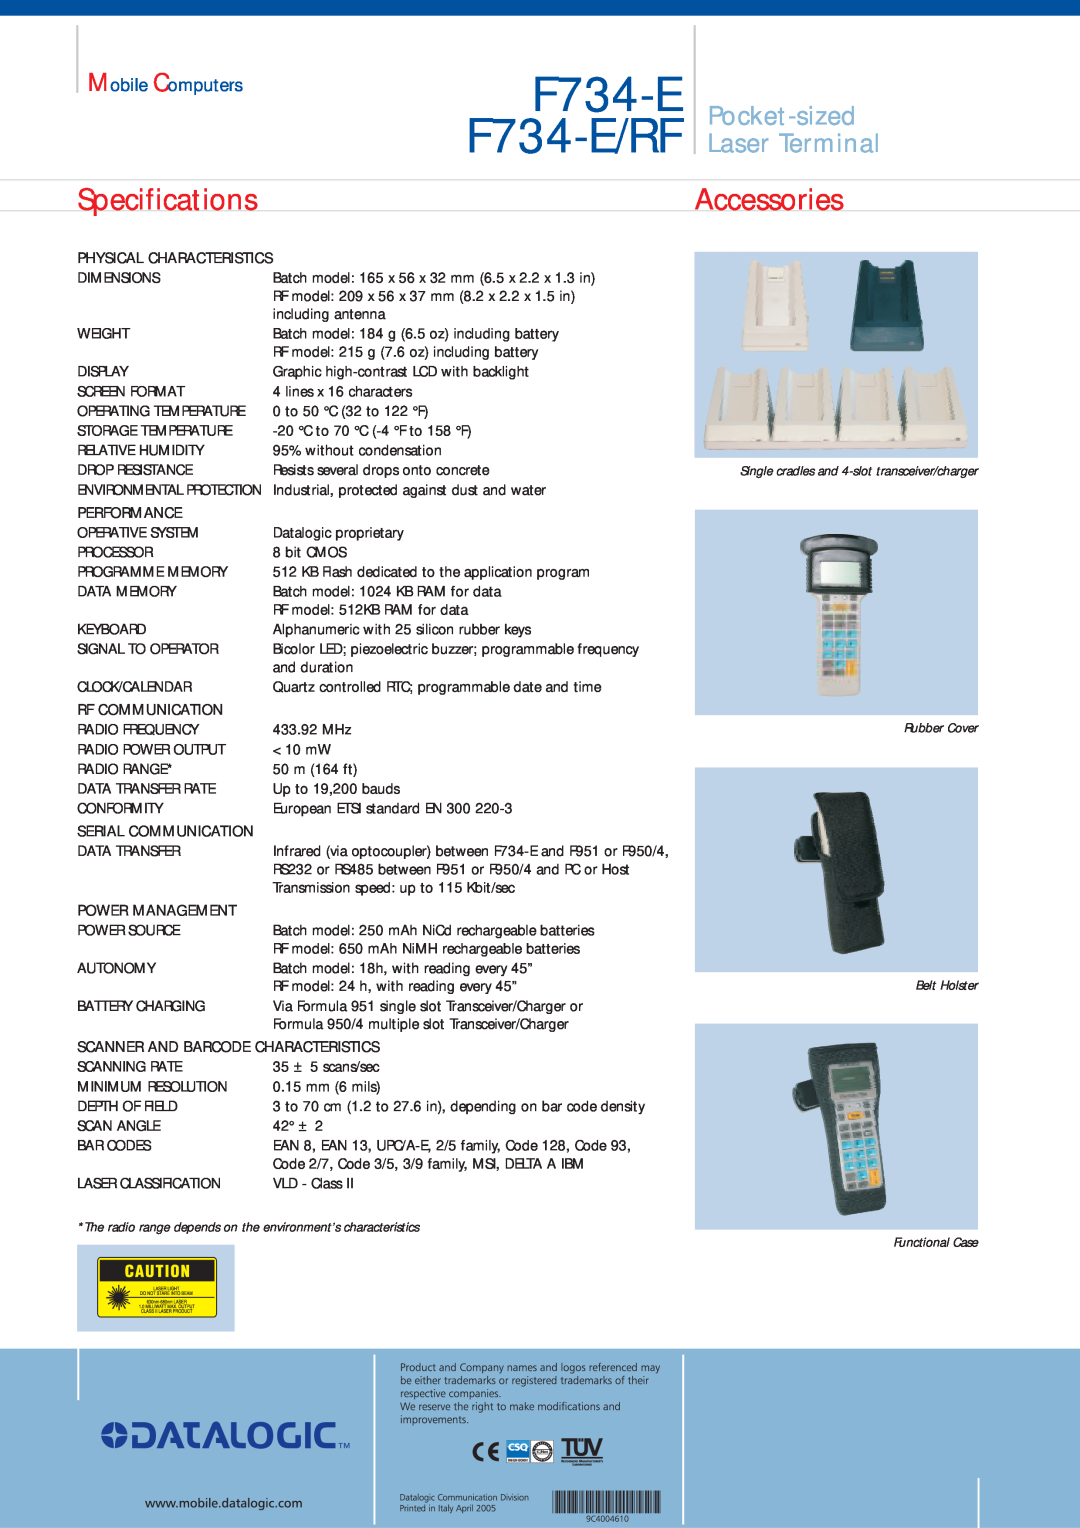 Datalogic Scanning manual Specifications, F734-E F734-E/RF, Accessories, Pocket-sized Laser Terminal, Mobile Computers 